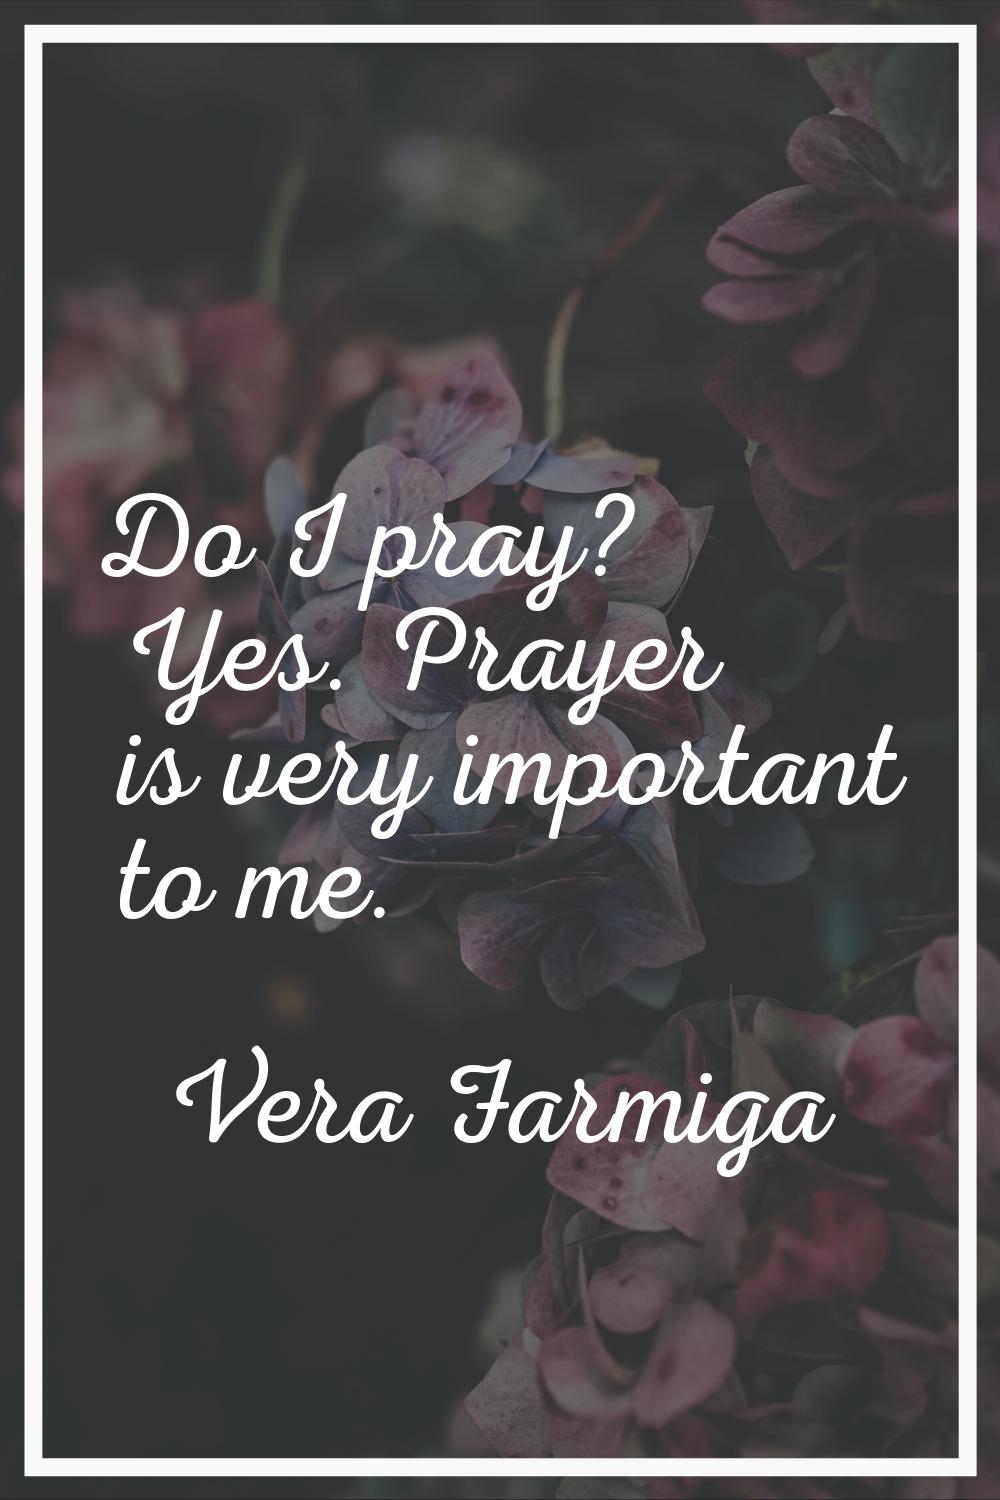 Do I pray? Yes. Prayer is very important to me.